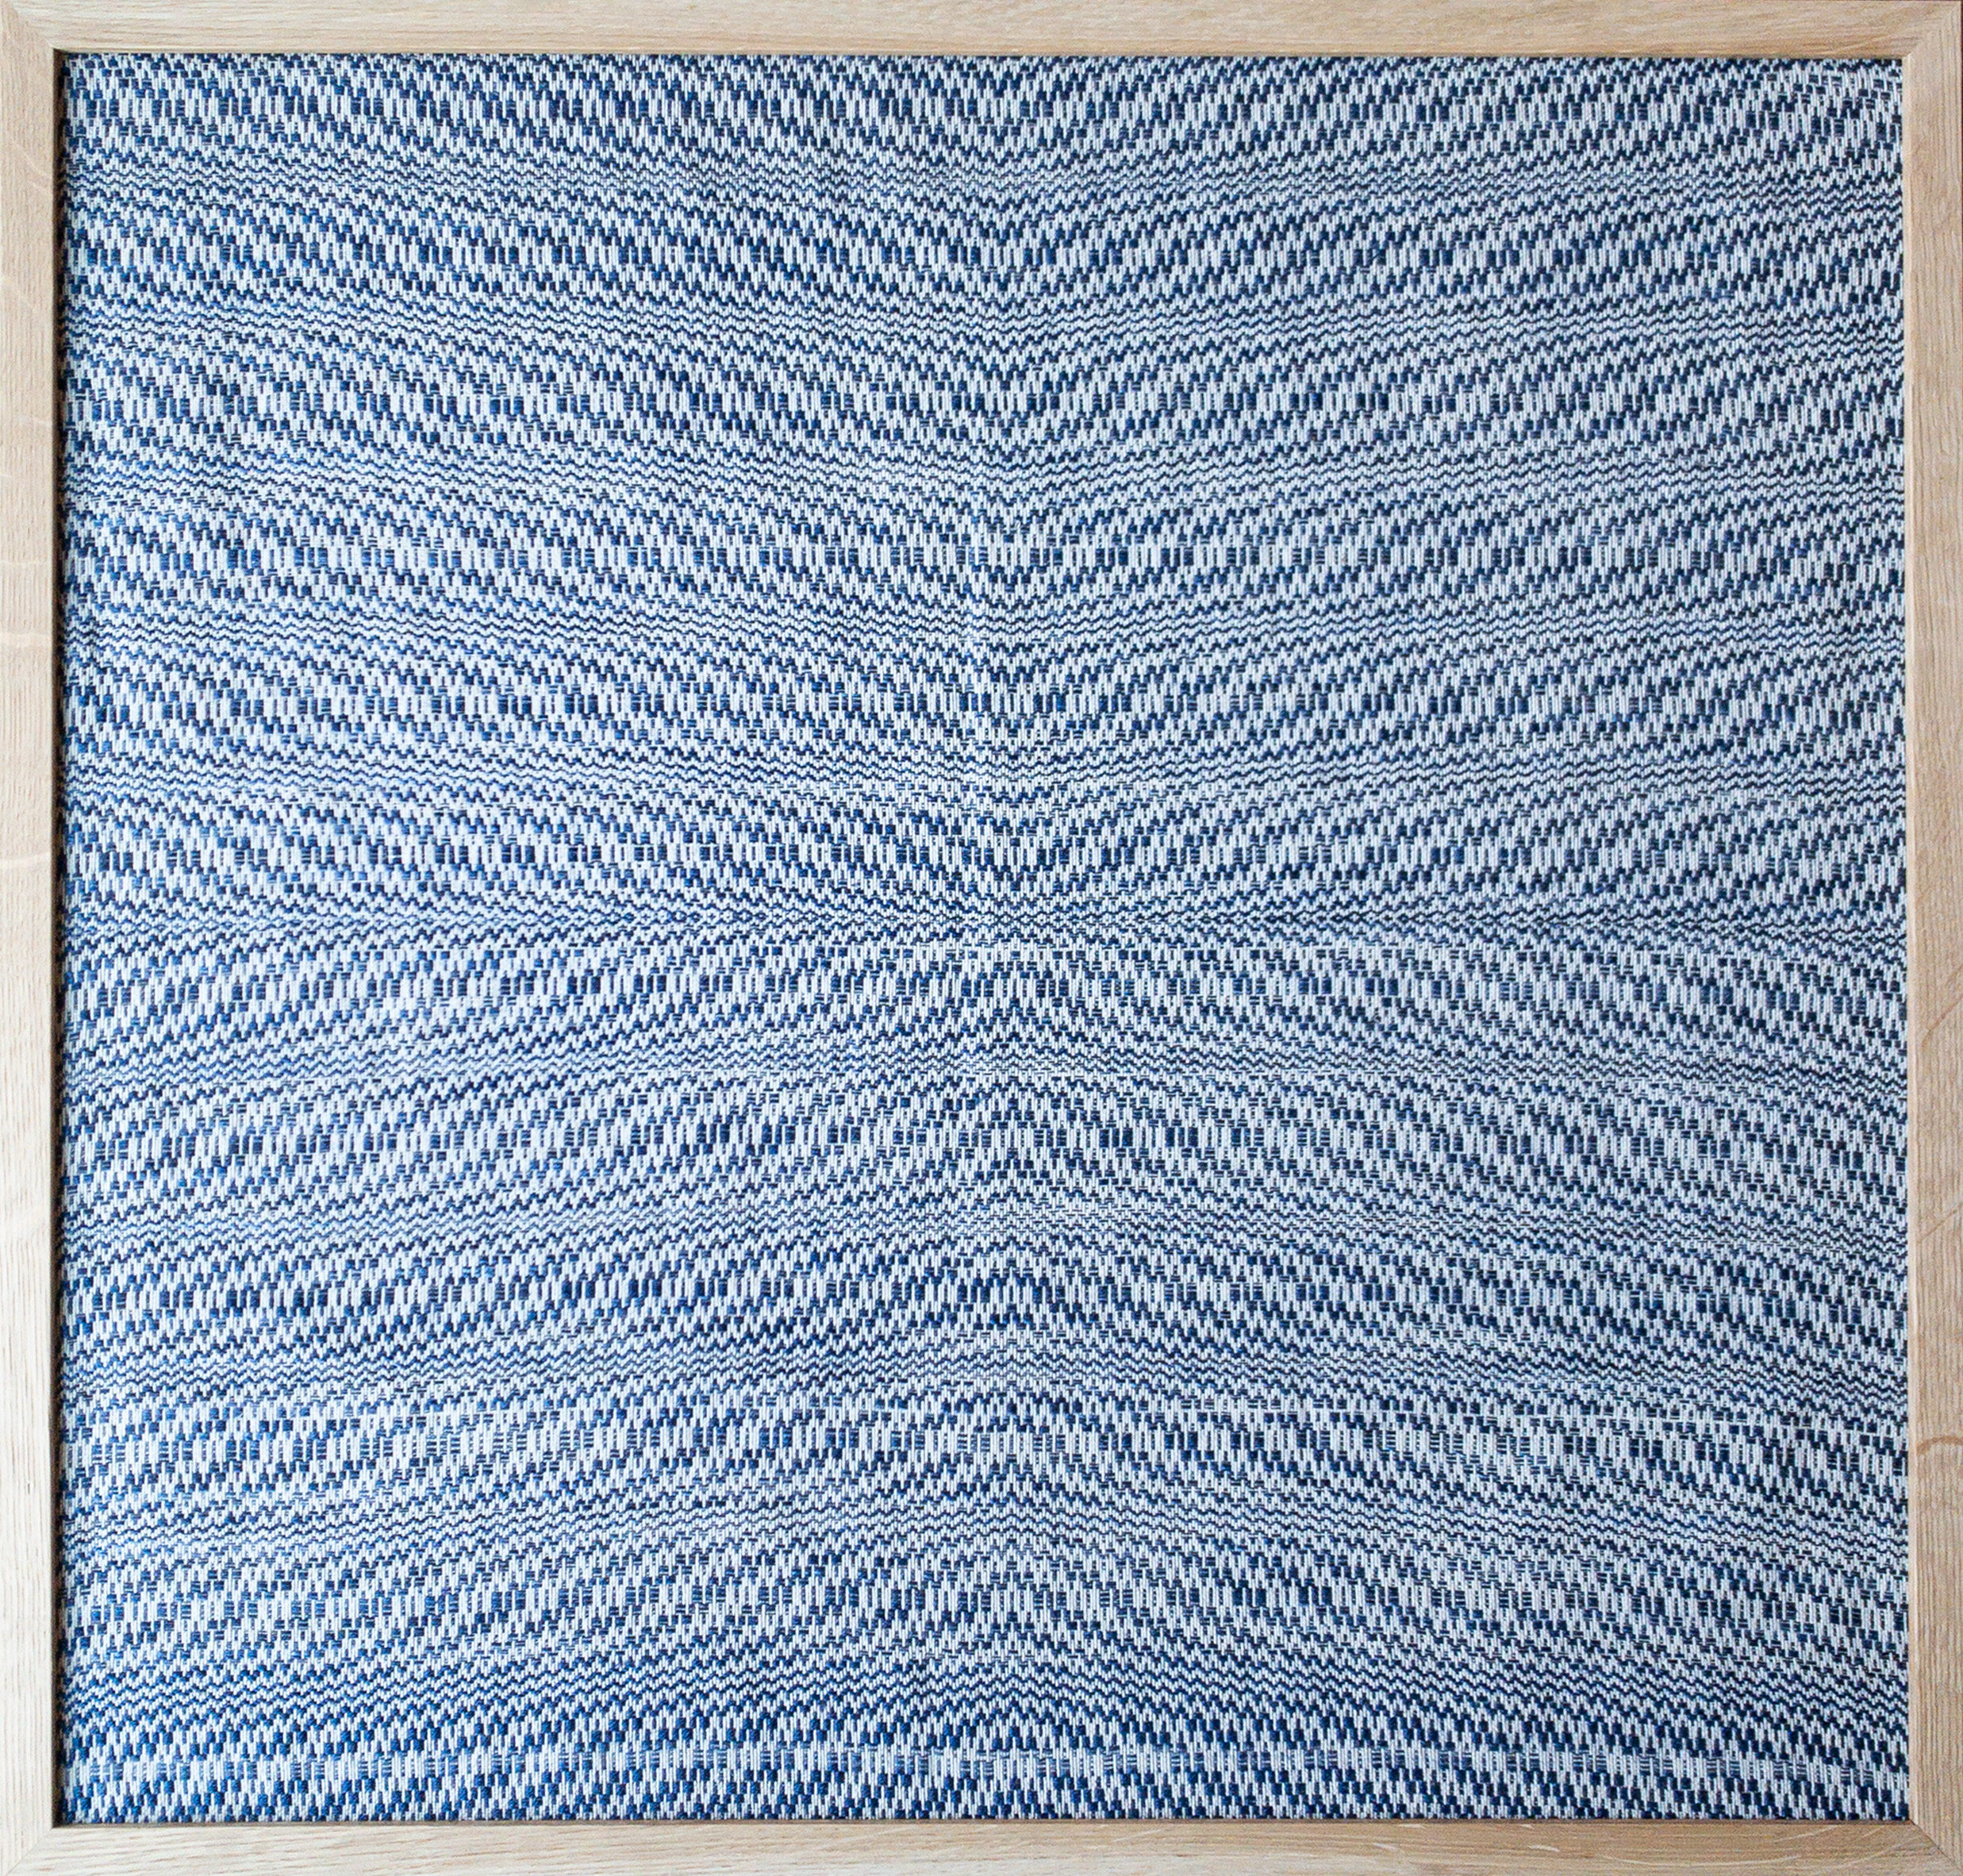 CURVED THREADING II, 2020, HANDWOVEN COTTON AND LINEN, 25" x 27"